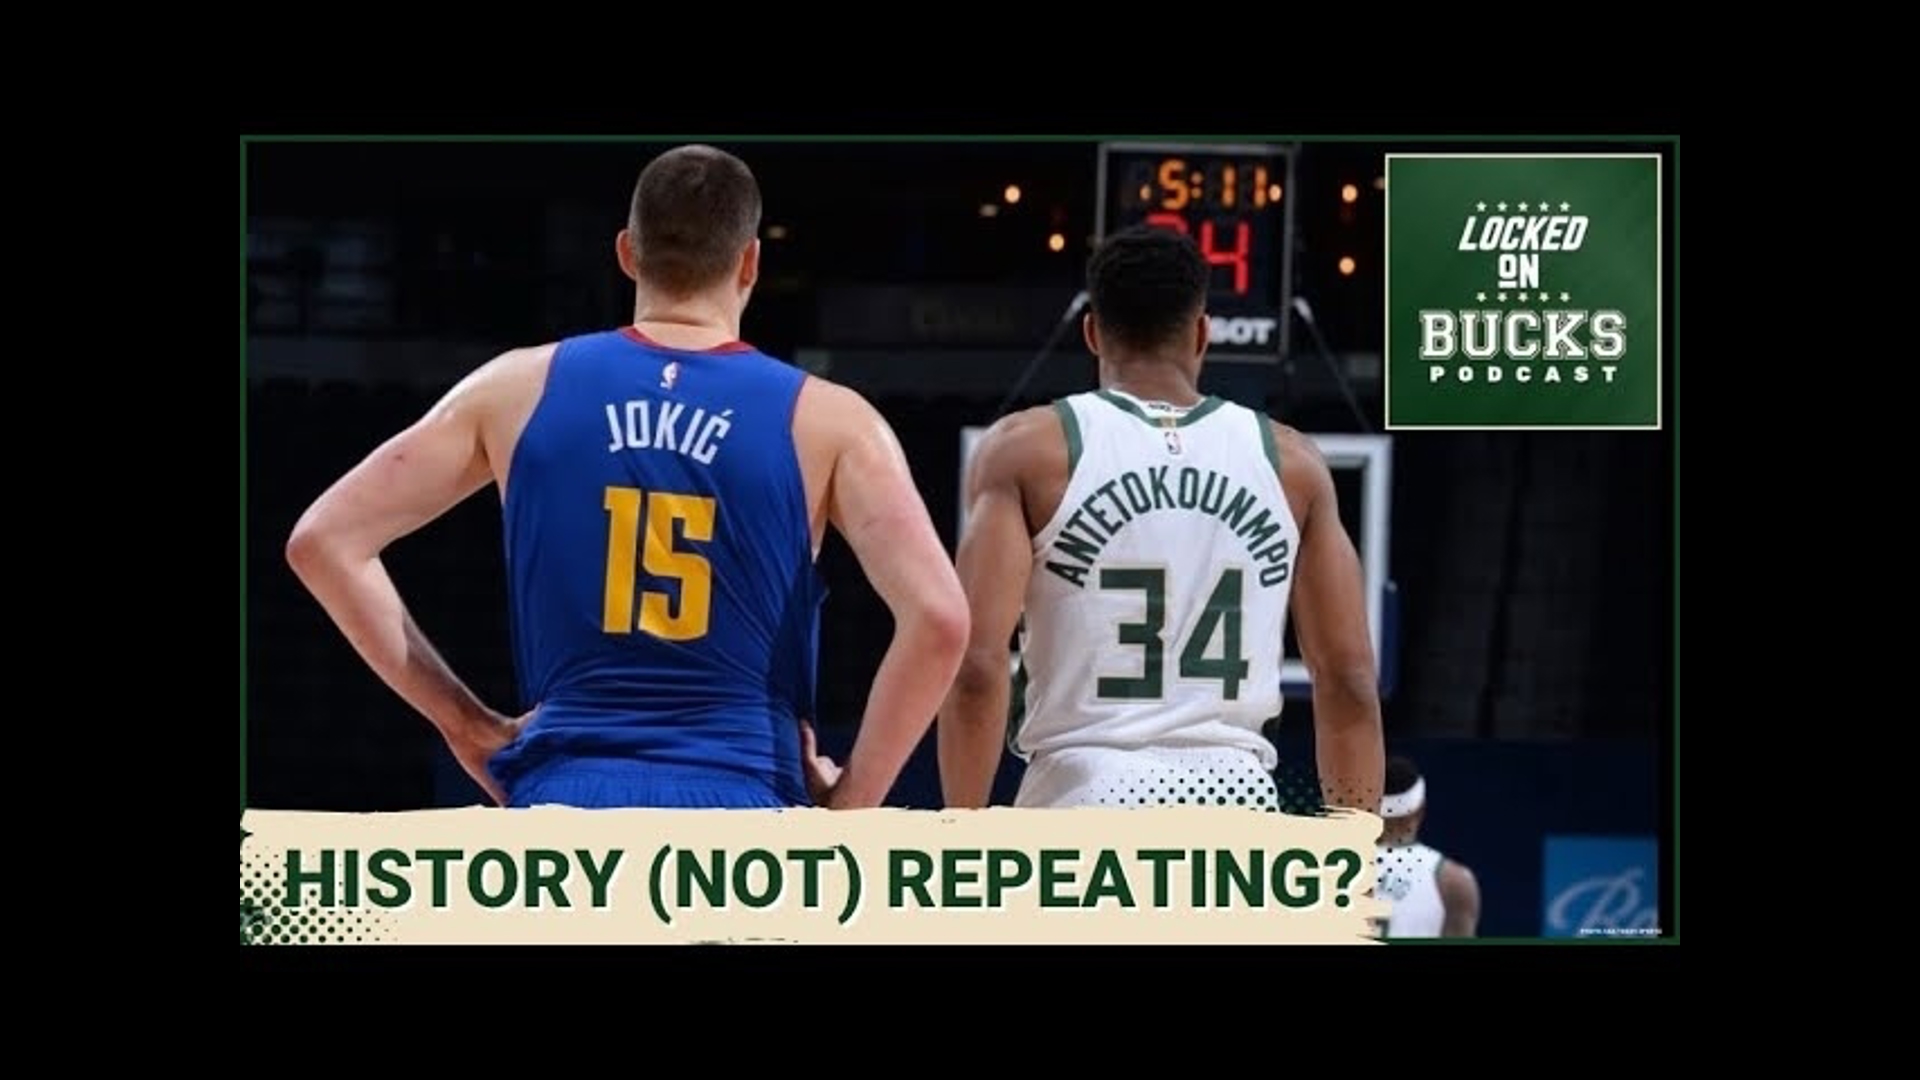 Justin and Camille take a look at some comps between the Bucks and the Denver Nuggets, an improbable Pacers run and the importance of luck in the playoffs.